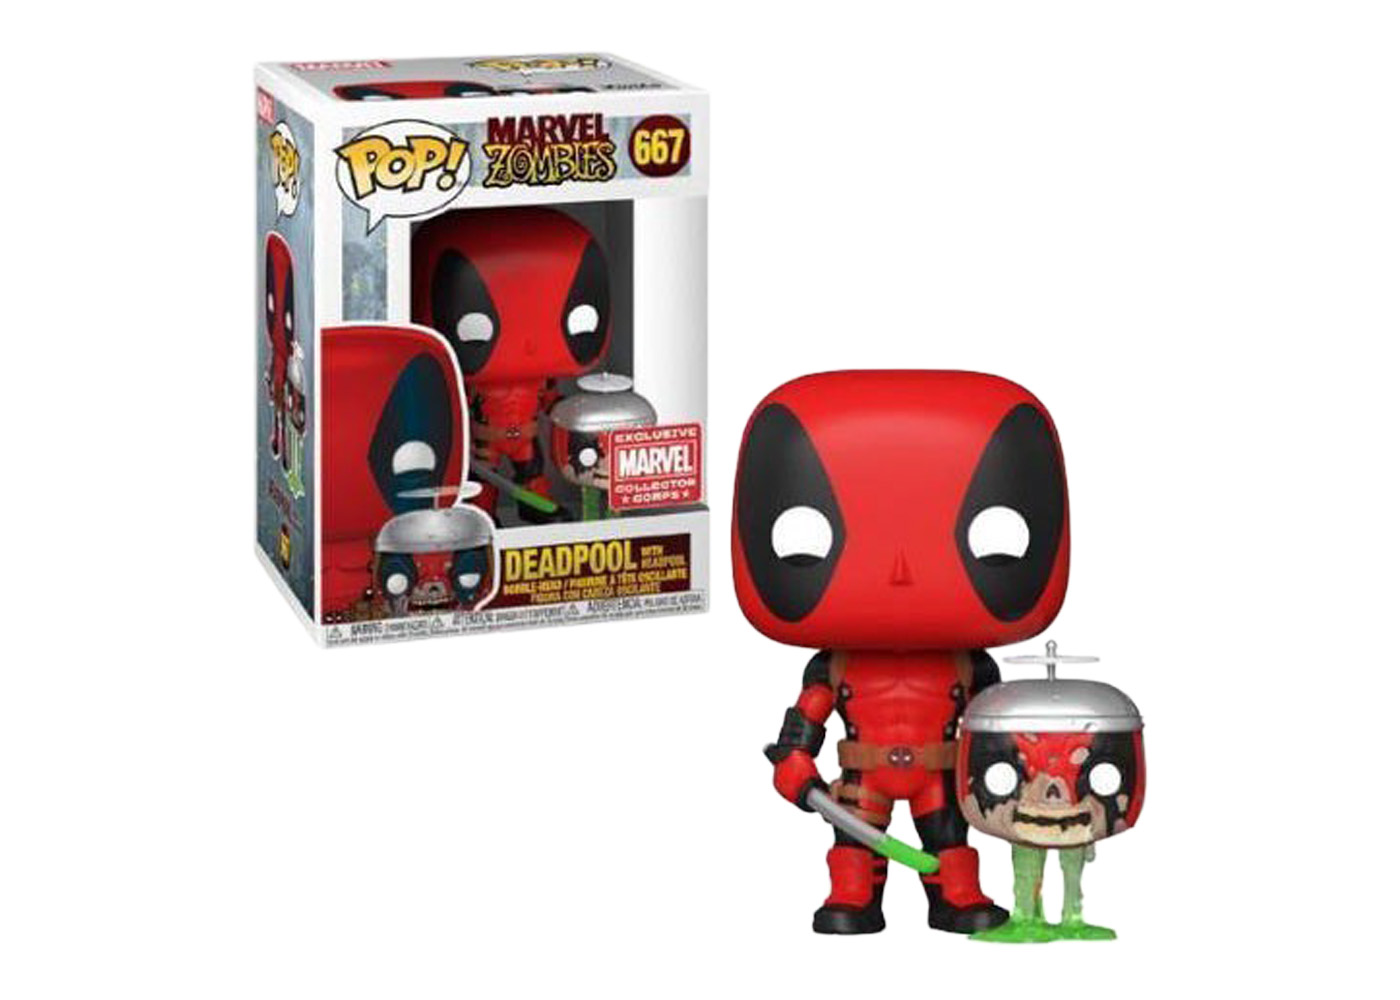 Funko Pop! Marvel Zombies Deadpool with Headpool Collector Corps 